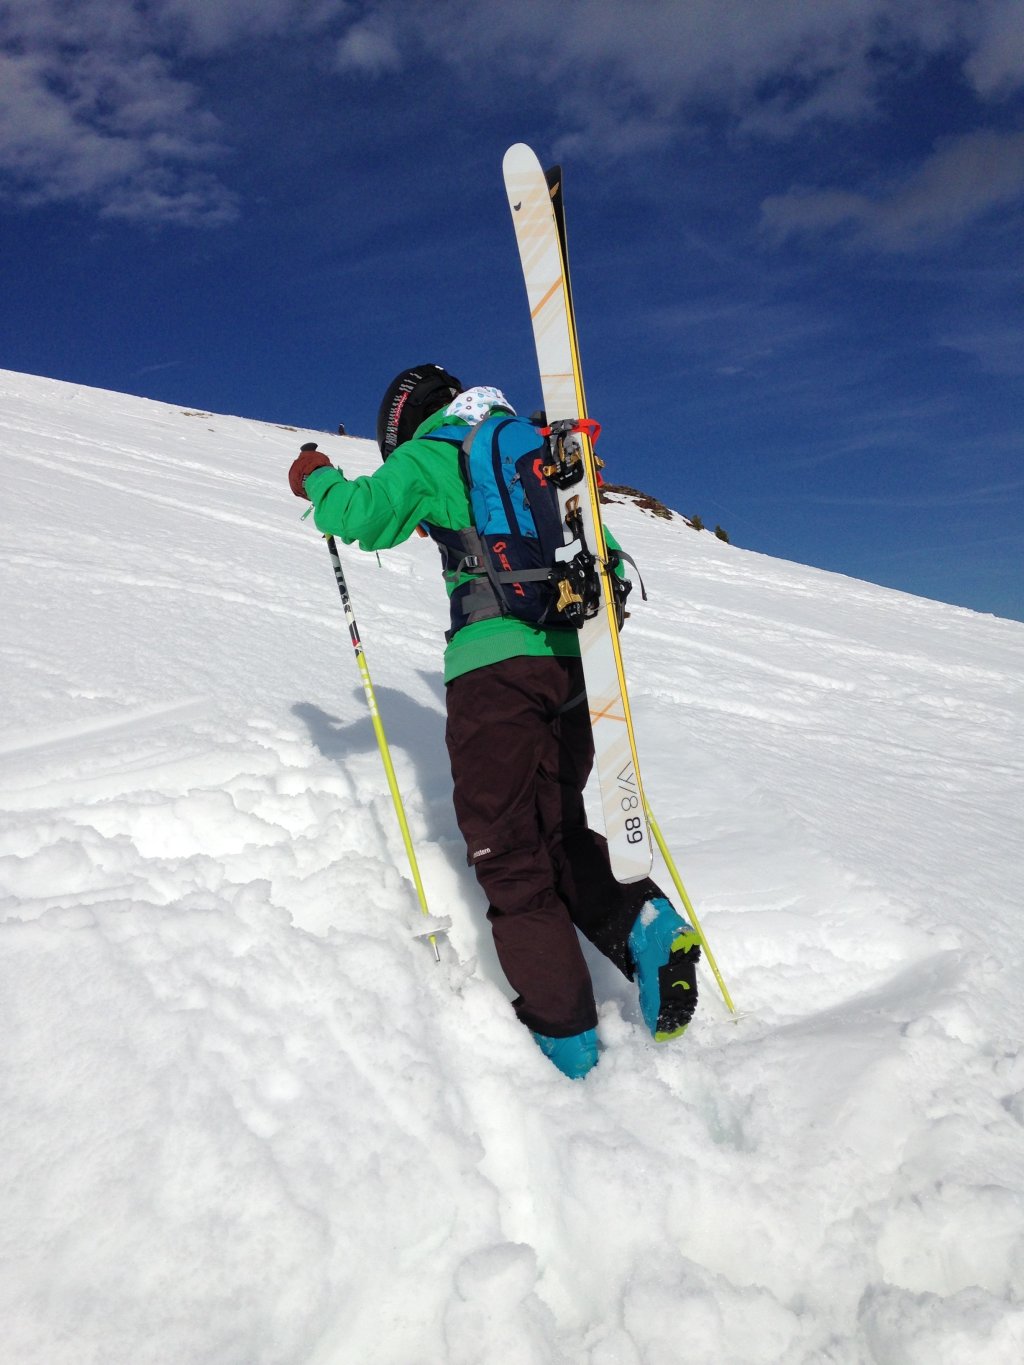 The ski holder is diagonal and works perfectly. The weight distribution on the backpack is very comfortable